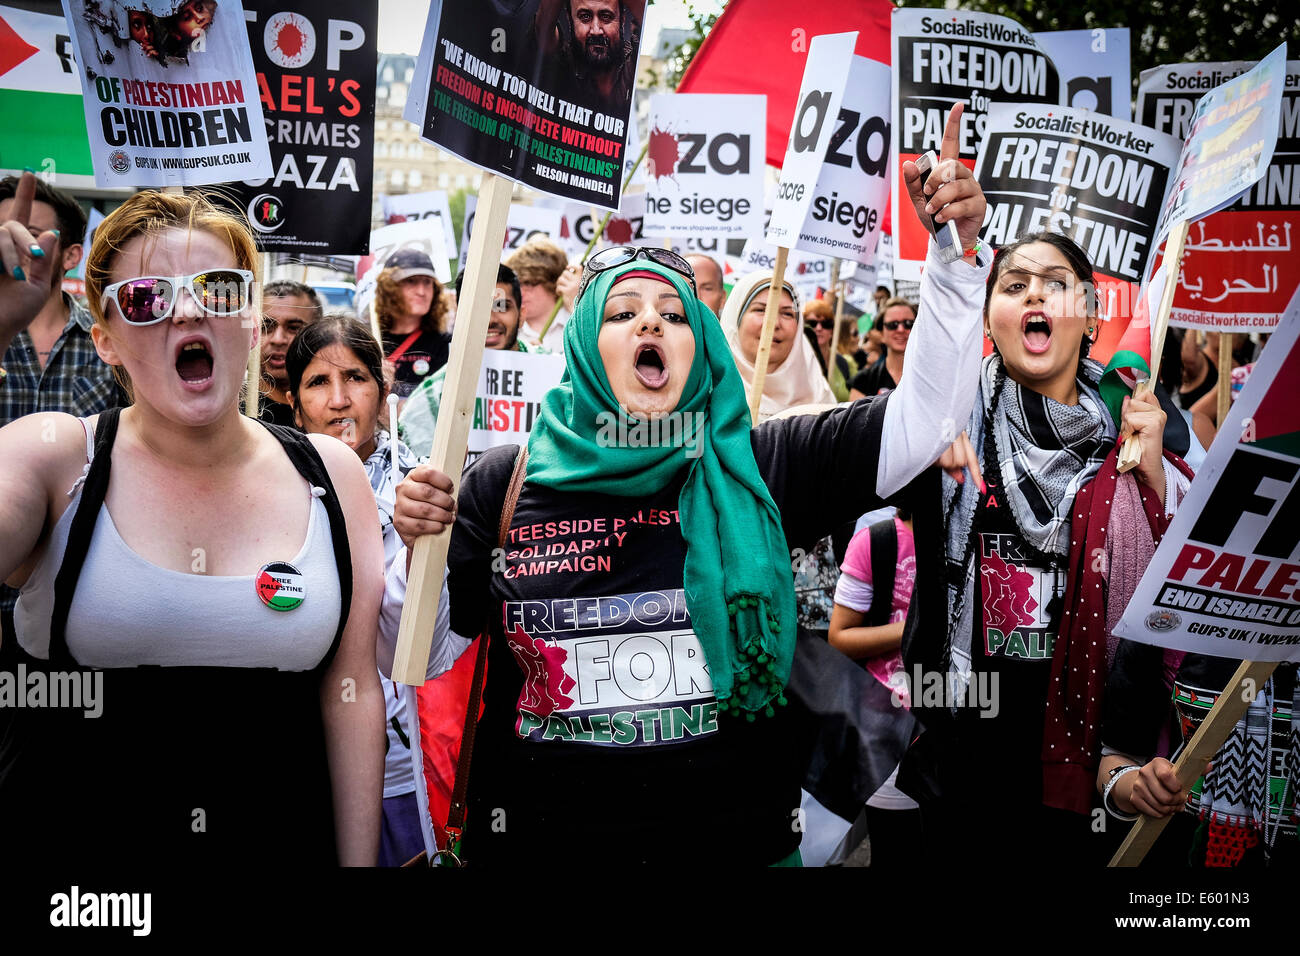 Portland Place, London, 9th August 2014.  Placards demanding an end to the violence in Gaza being held aloft at a protest in London.  Photographer;  Gordon Scammell/Alamy Live News Stock Photo